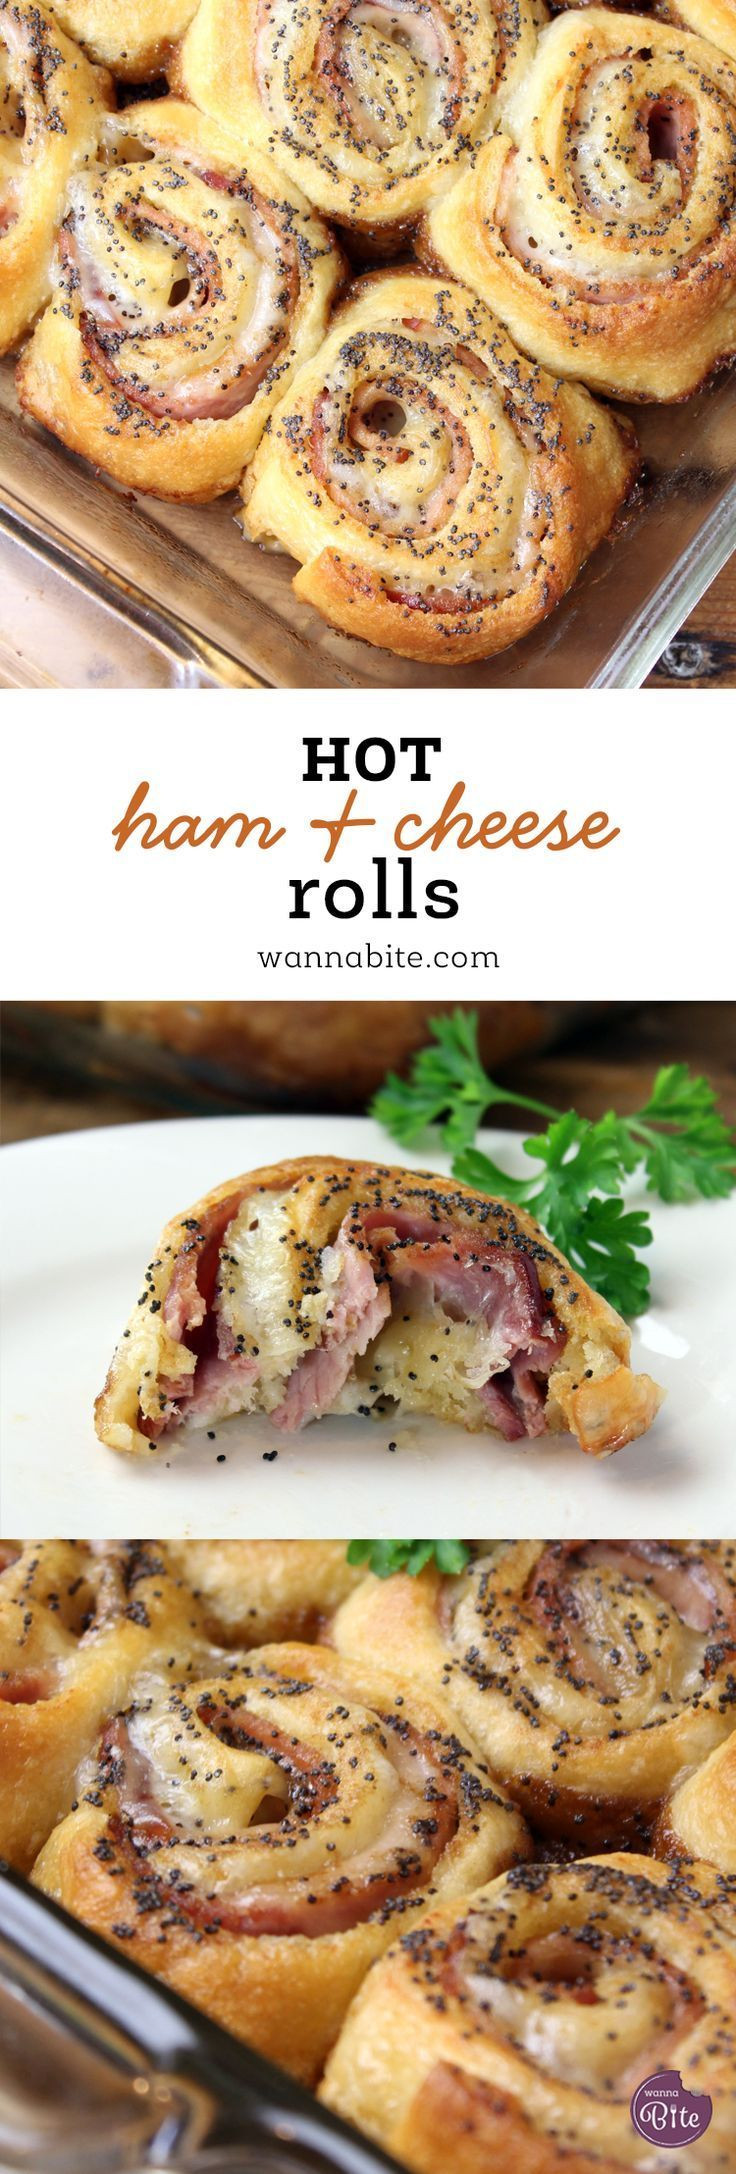 Appetizers Using Crescent Rolls
 Hot Ham and Cheese Rolls Recipe